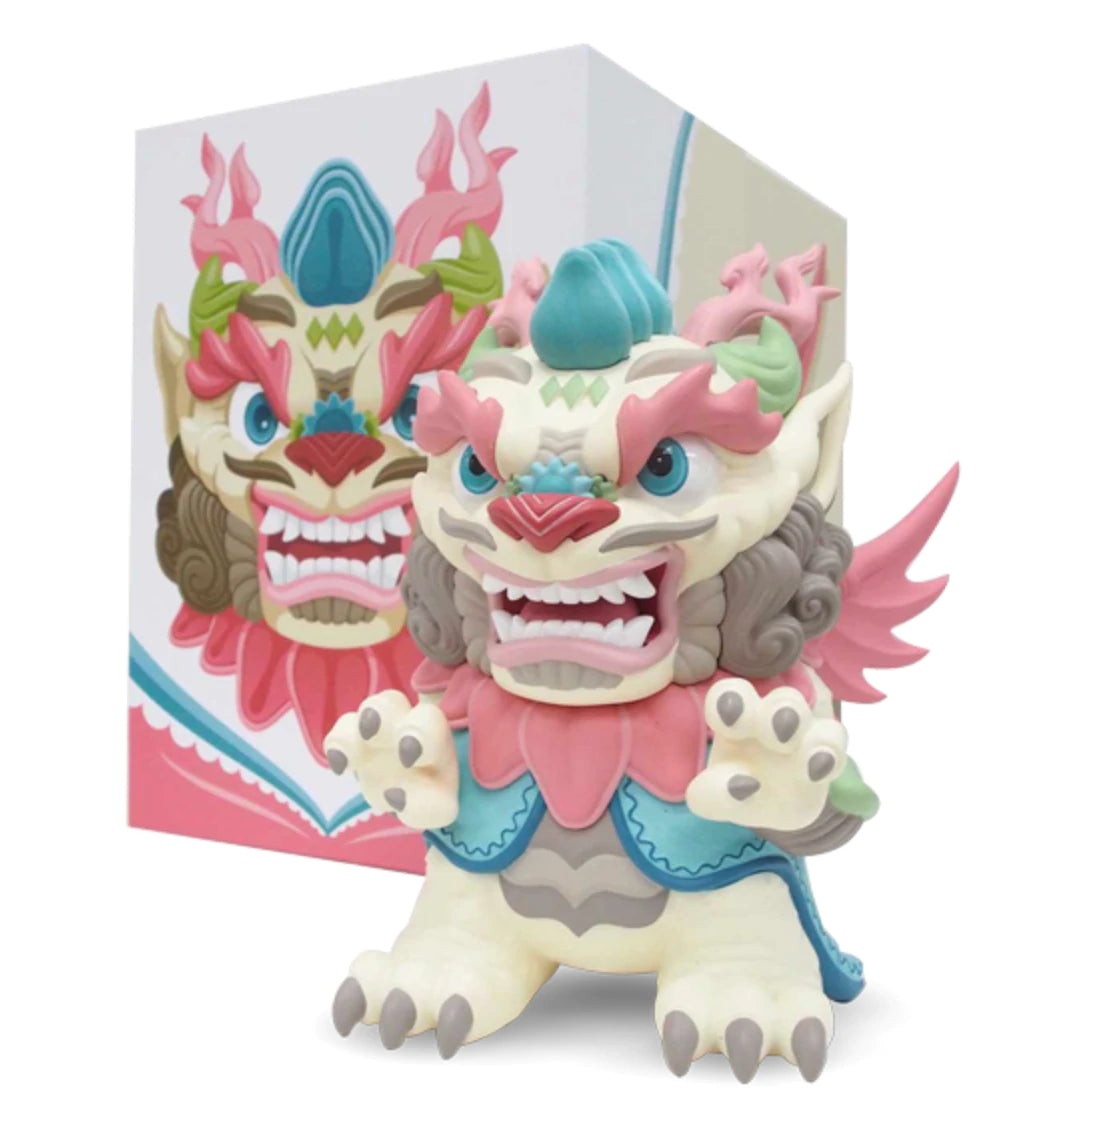 Imperial Lotus Dragon Light Edition 10-inch vinyl figure by Scott Tolleson Available Now